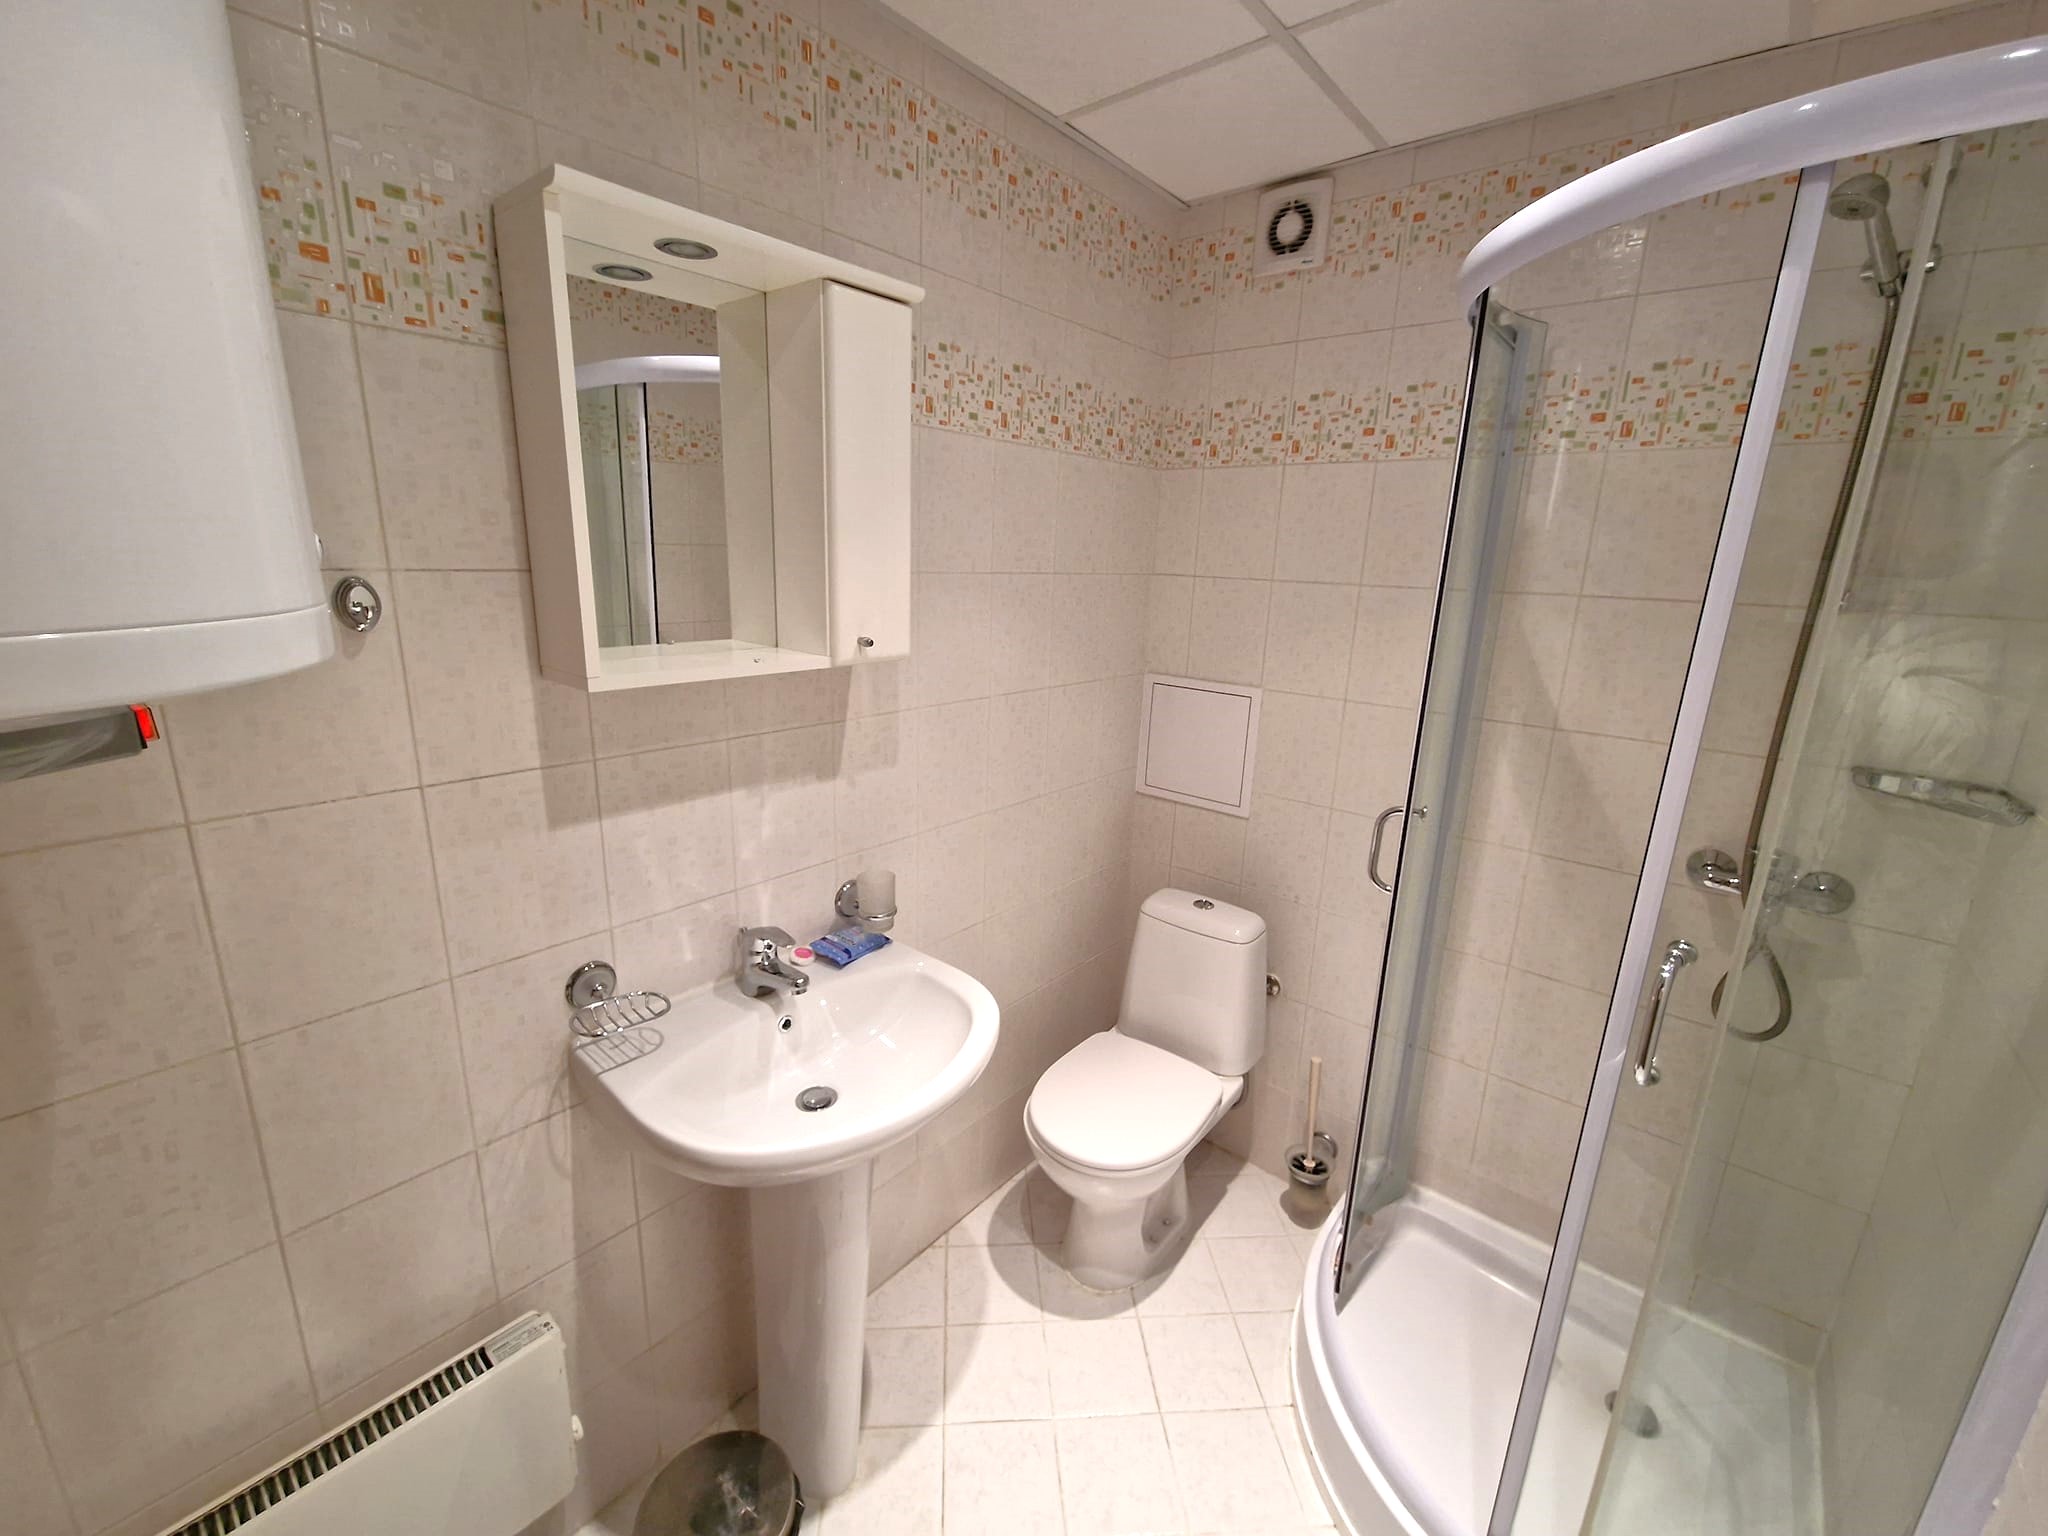 South one bedroom apartment only 200 meters from Kempinski Hotel and Victoria Restaurant